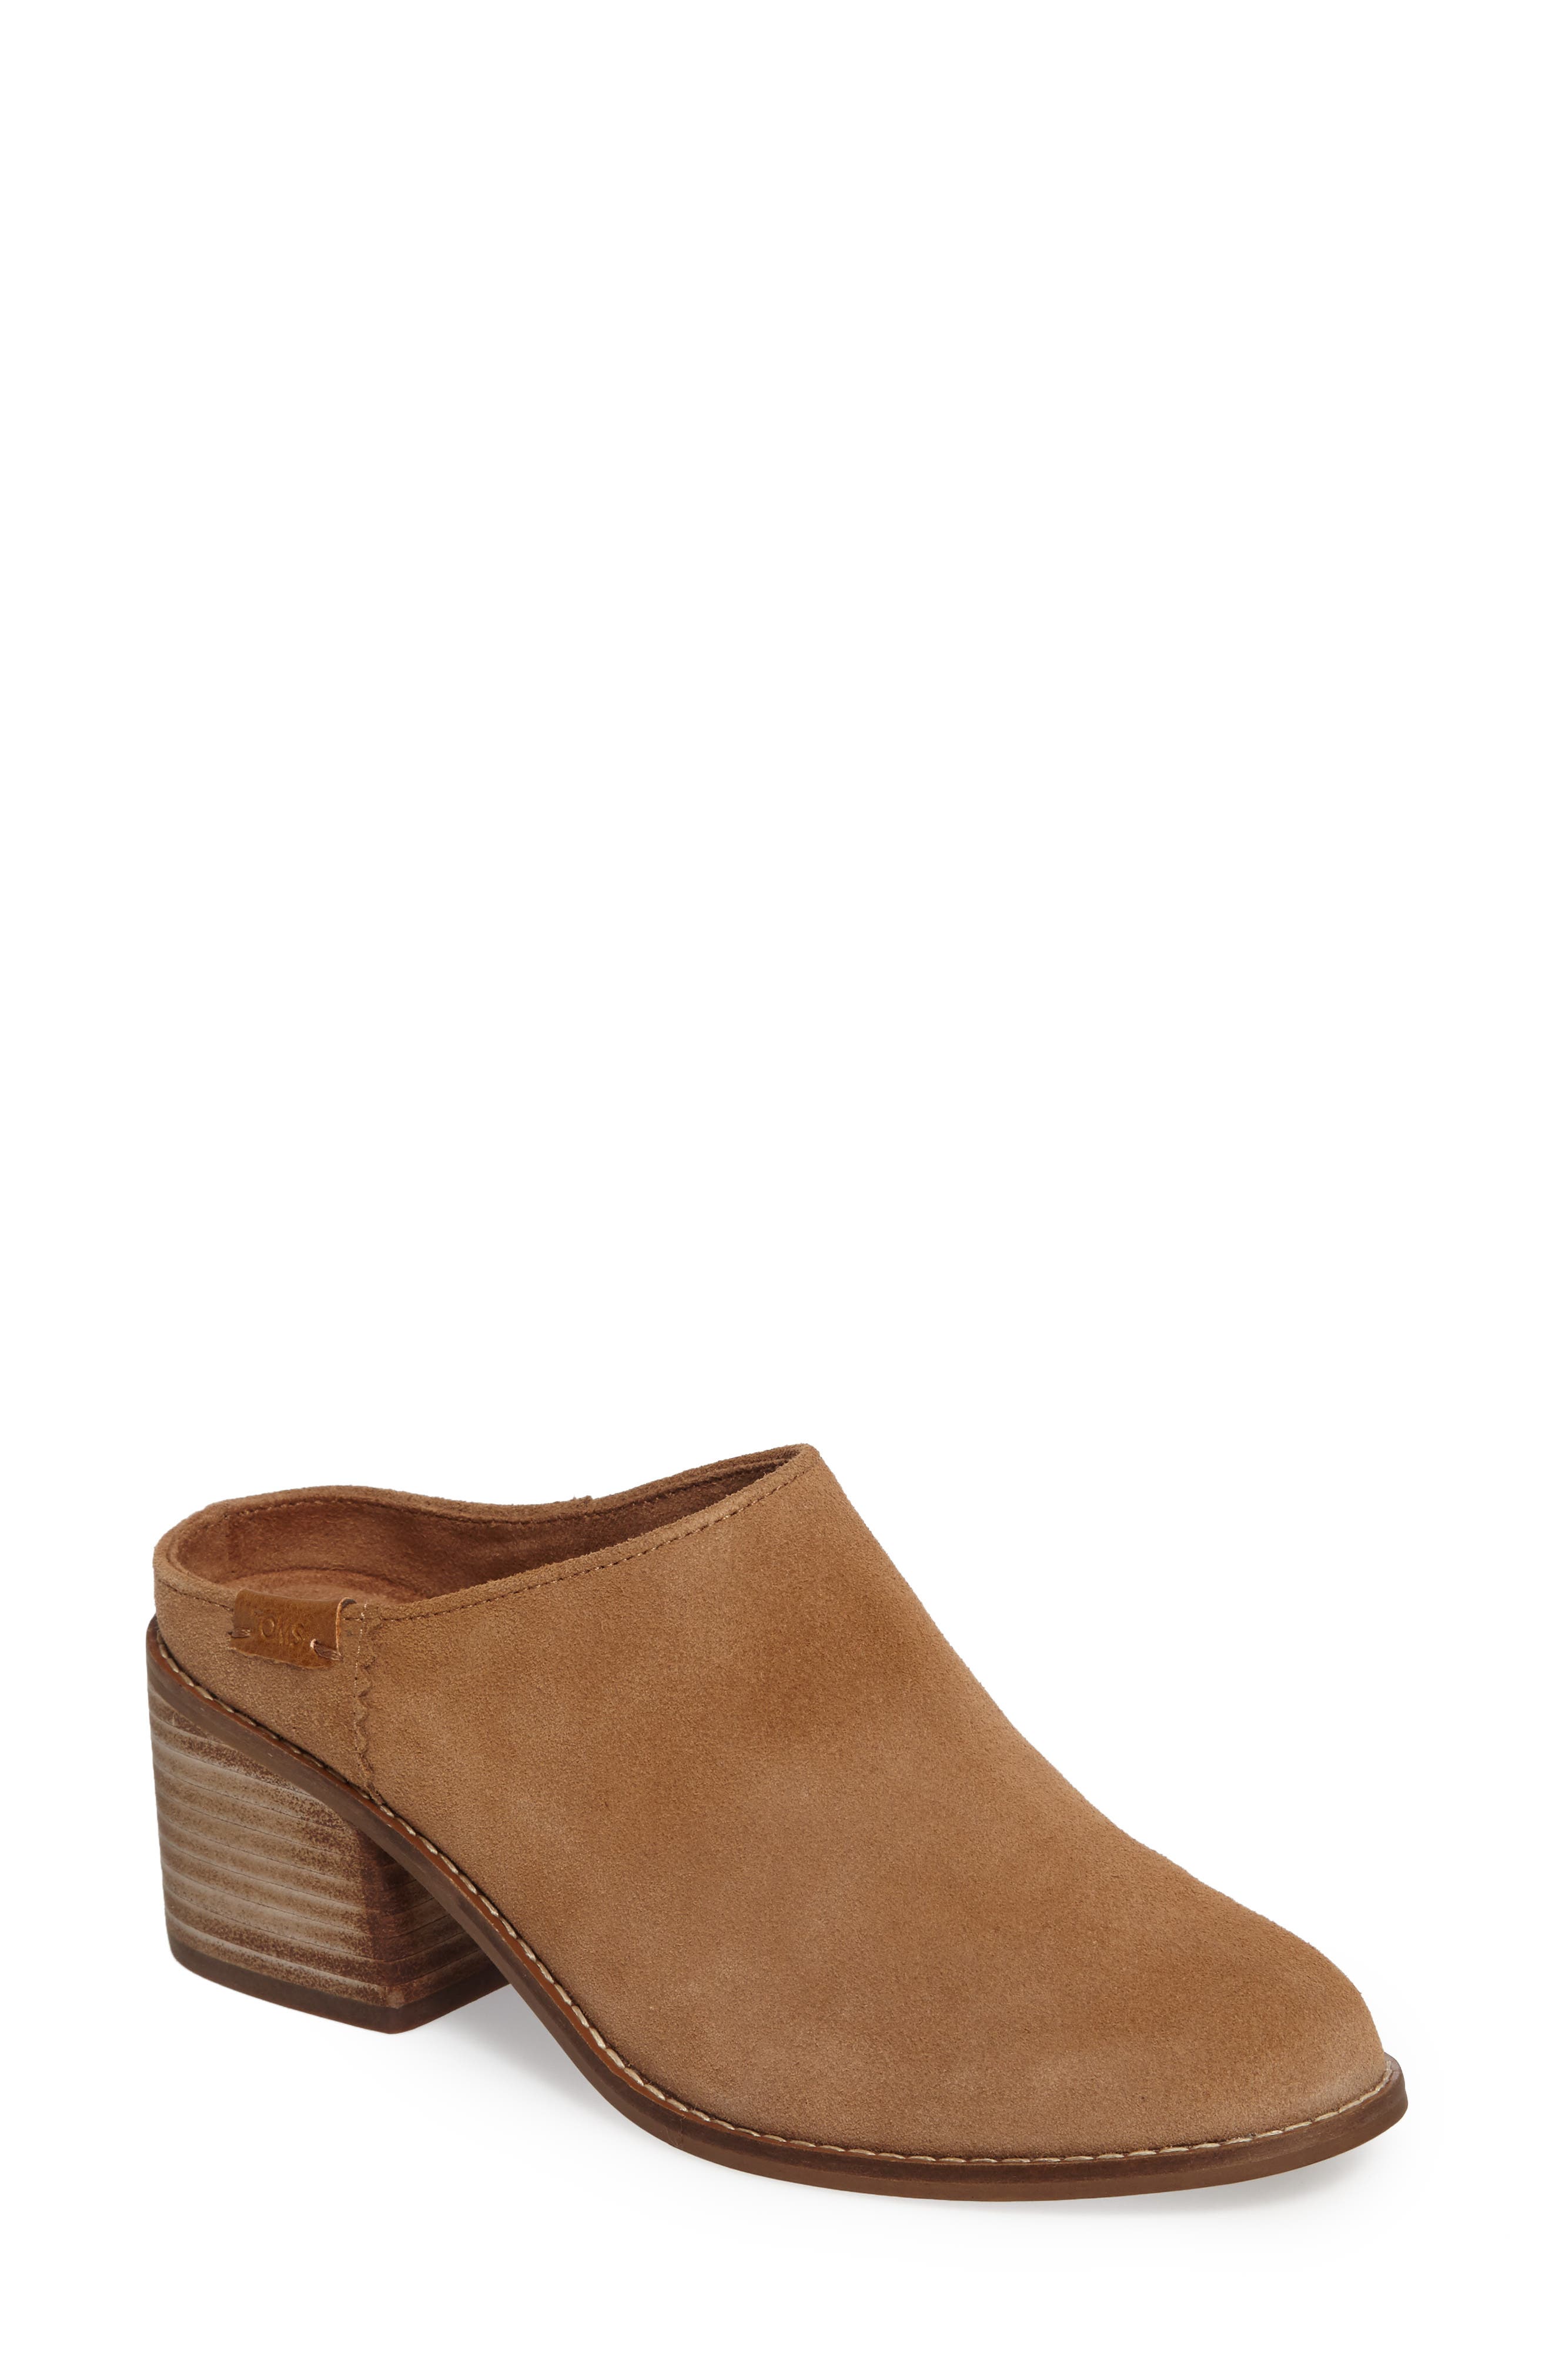 toms mules nordstrom